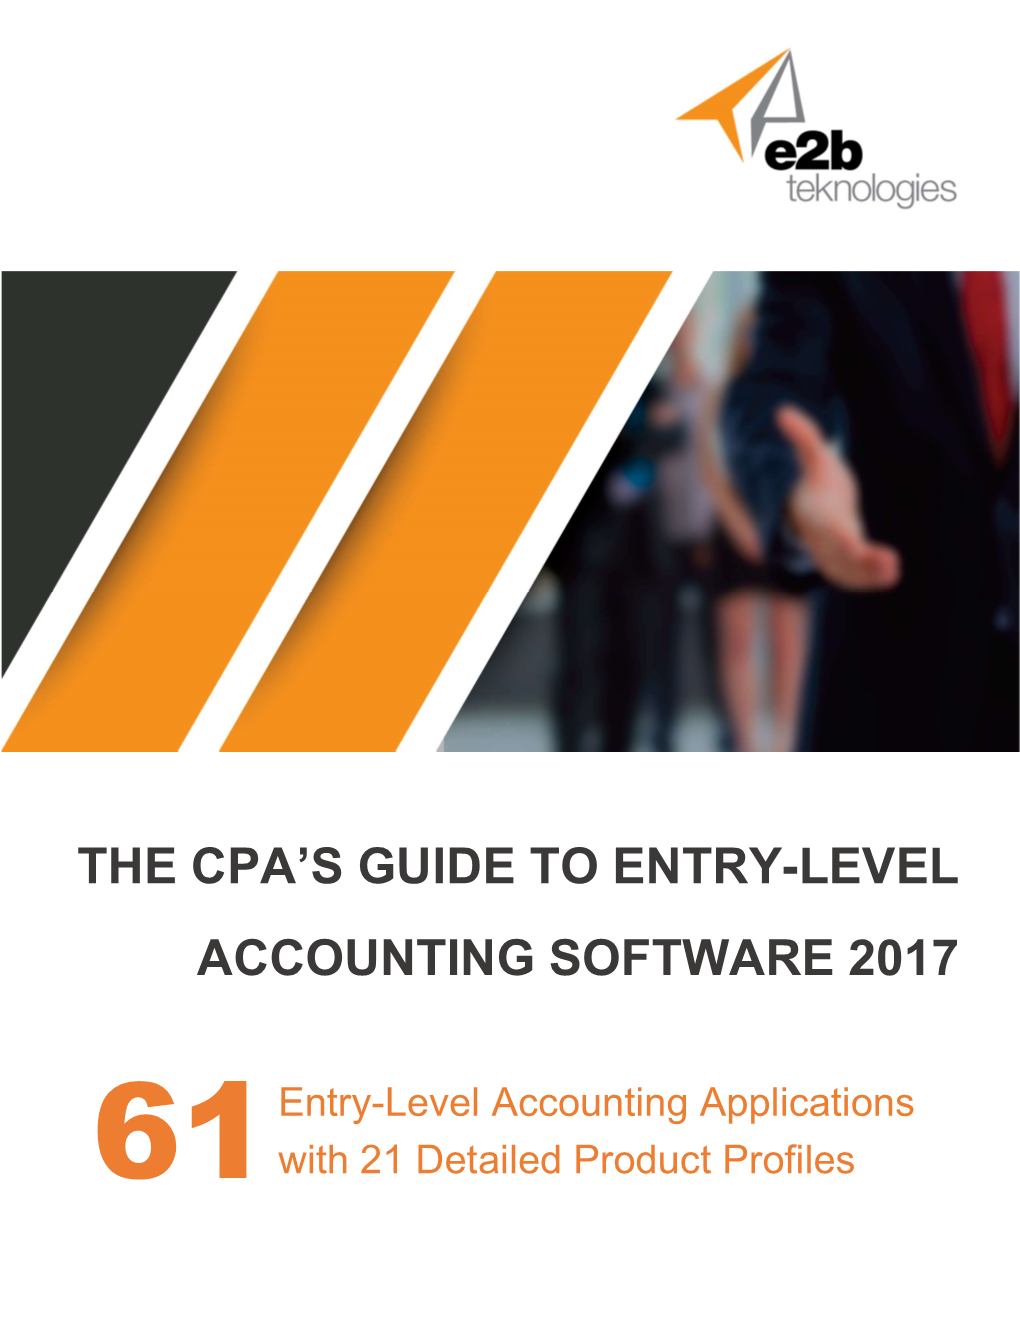 The Cpa's Guide to Entry-Level Accounting